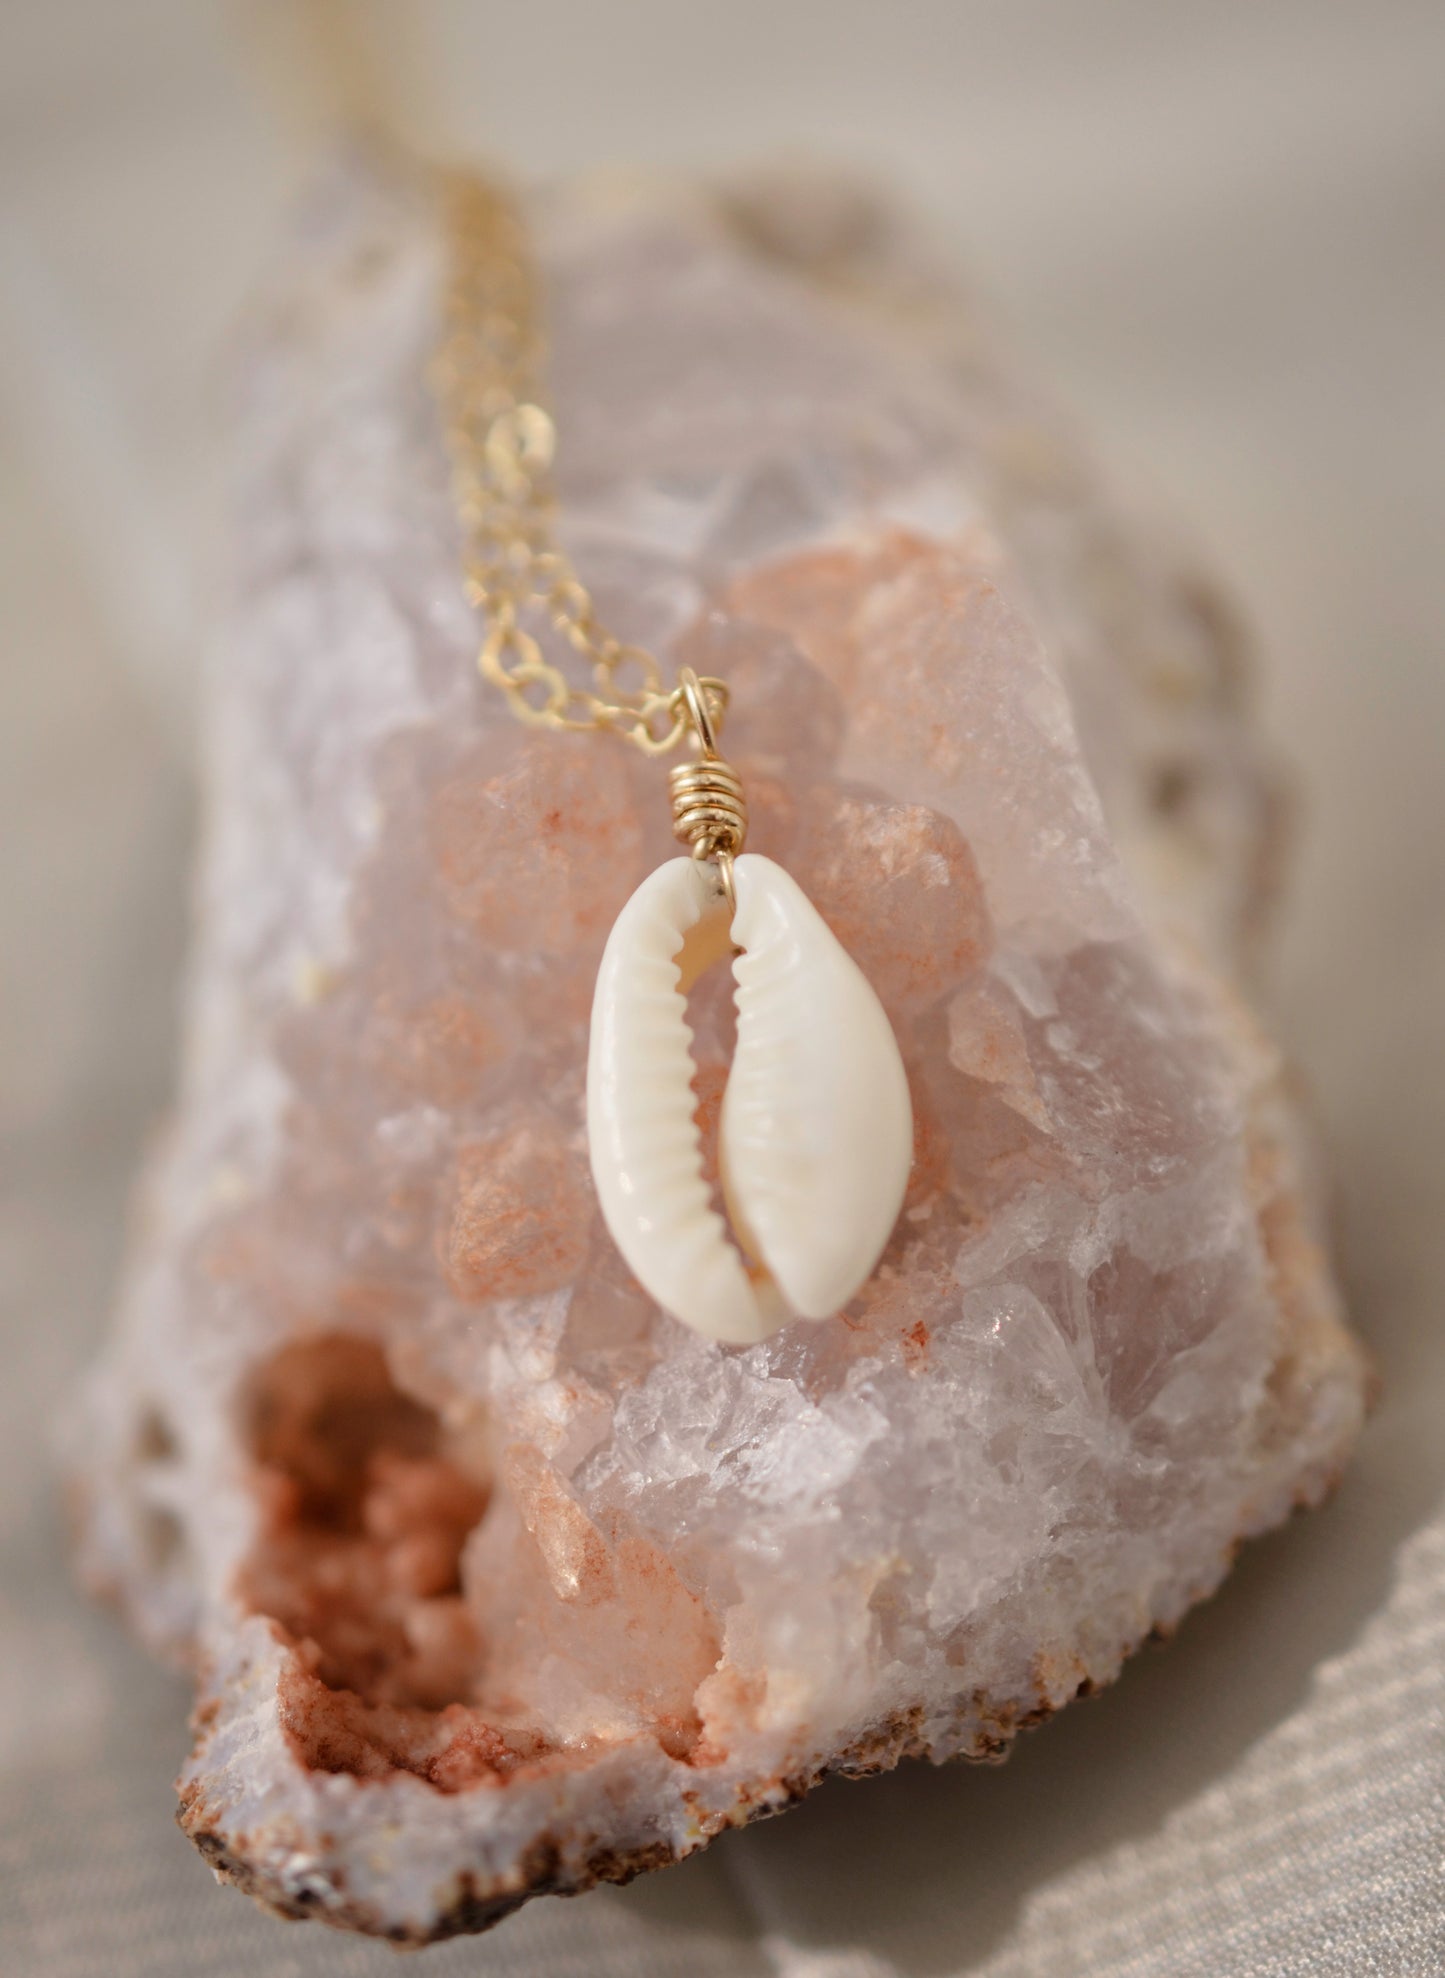 Creamy white natural Cowrie shell set onto a 14k gold filled chain.